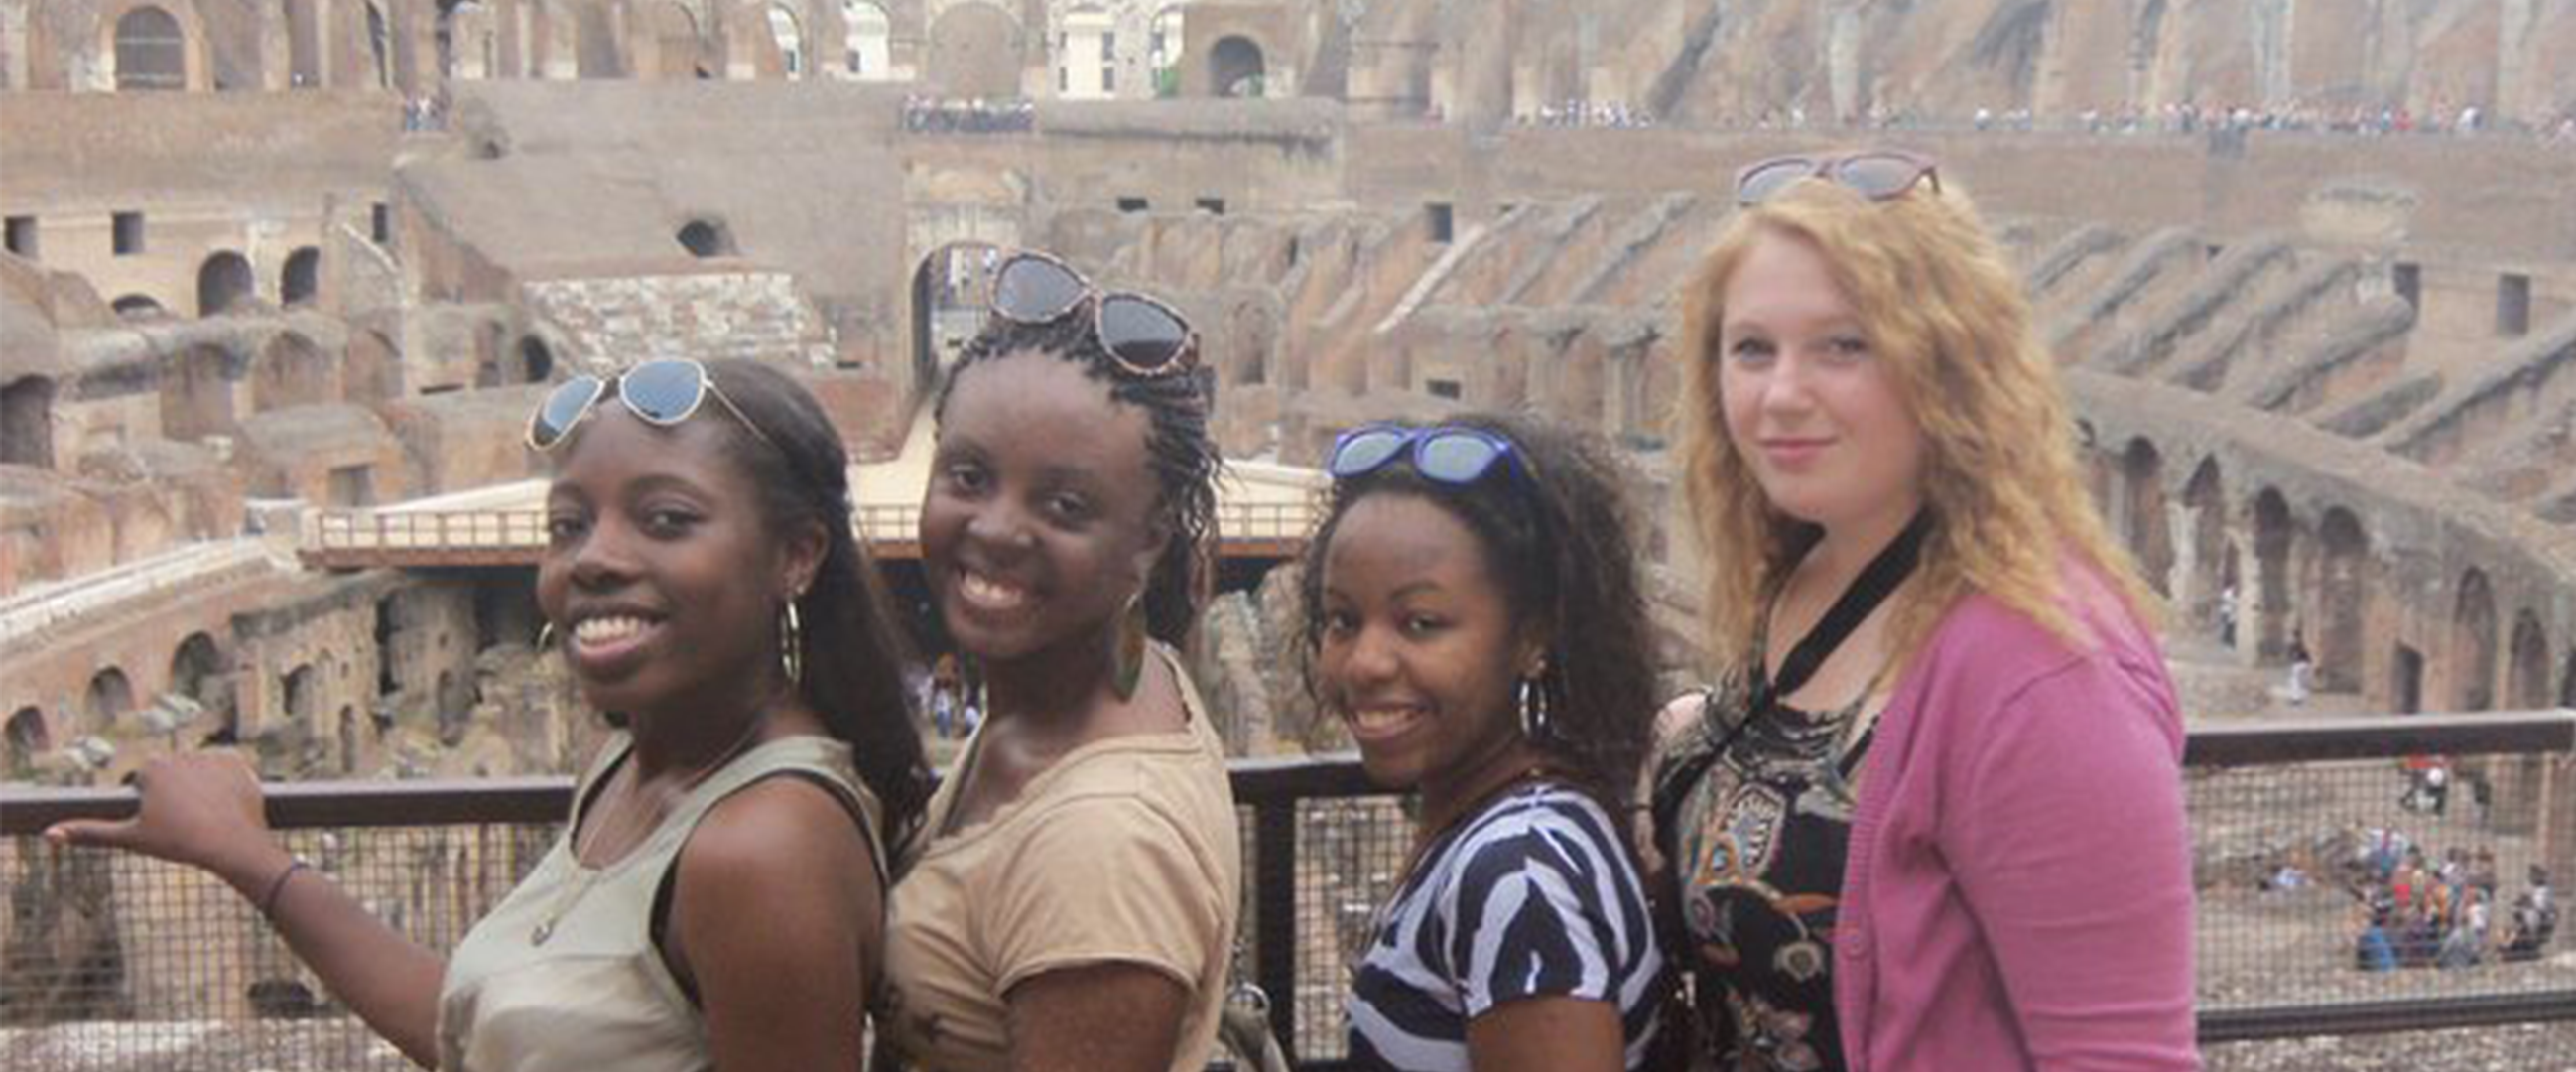 Erica with study abroad friends posing at the Coliseum